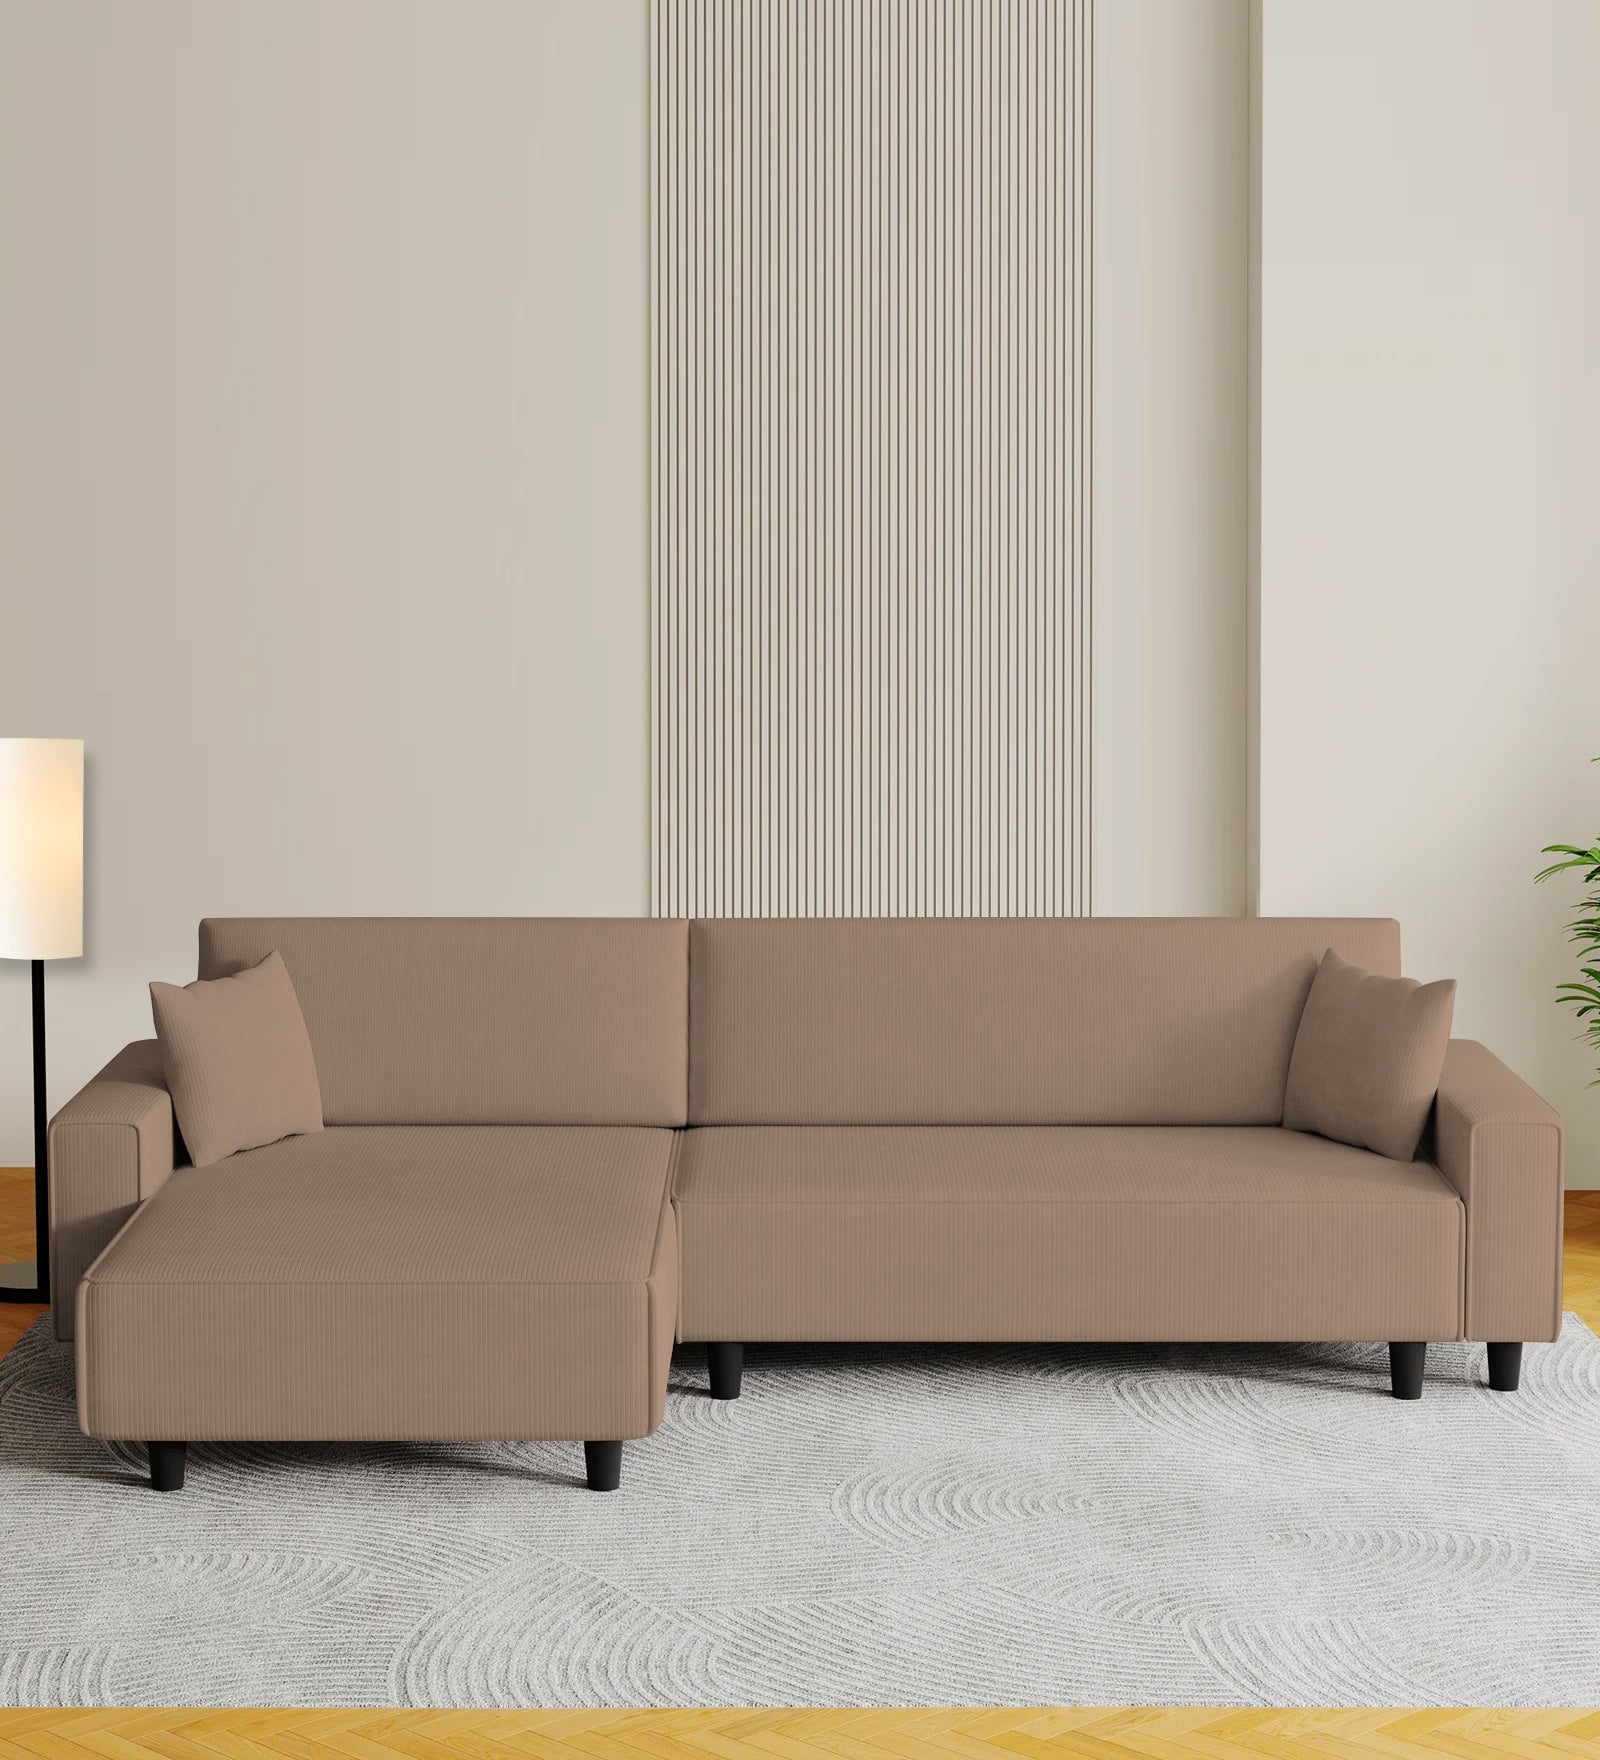 PPeach Fabric RHS 6 Seater Sectional Sofa Cum Bed With Storage In Cookie Beige Colour